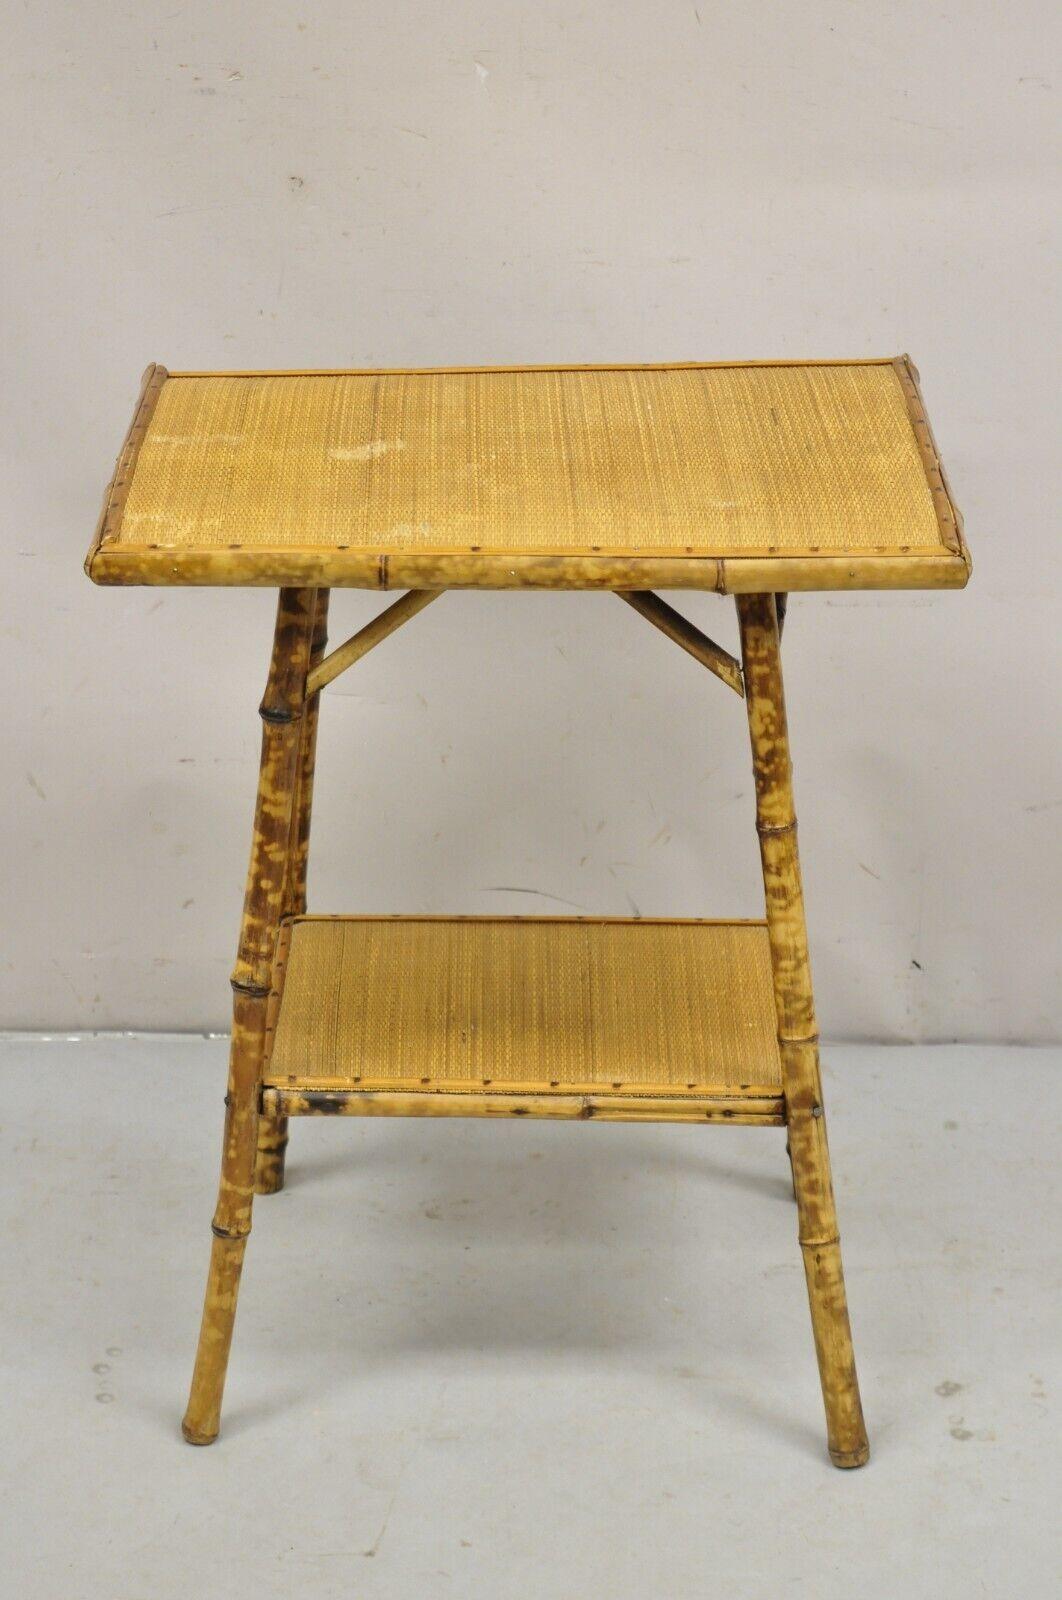 Antique English Victorian Bamboo and Cane 2 Tier Plant Stand Side Table. Circa 1900 Measurements: 25.5